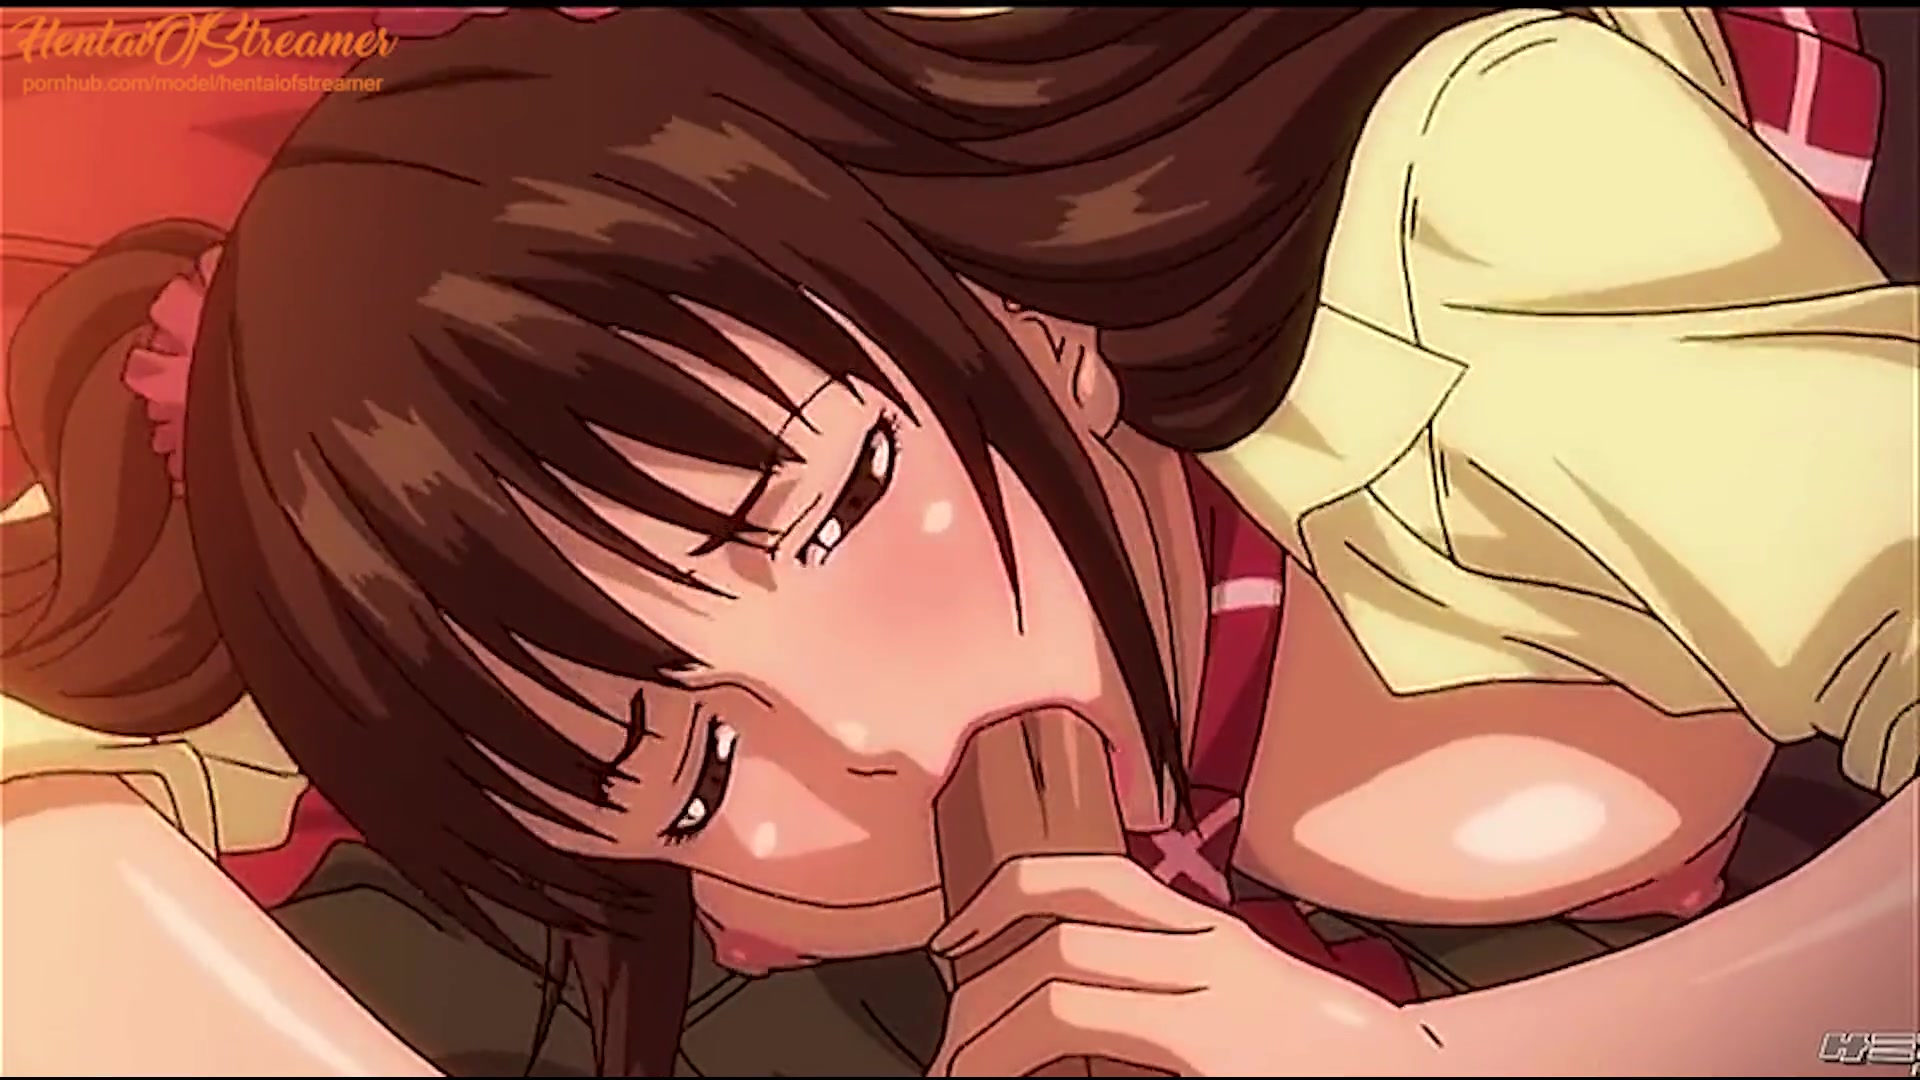 Deep Hentai Porn - Anime Porn Uncensored | Hotwife Dude Sees his Gf Plumb and Deep-Throat off  another Stud | Anime Porn, Anime - uiPorn.com